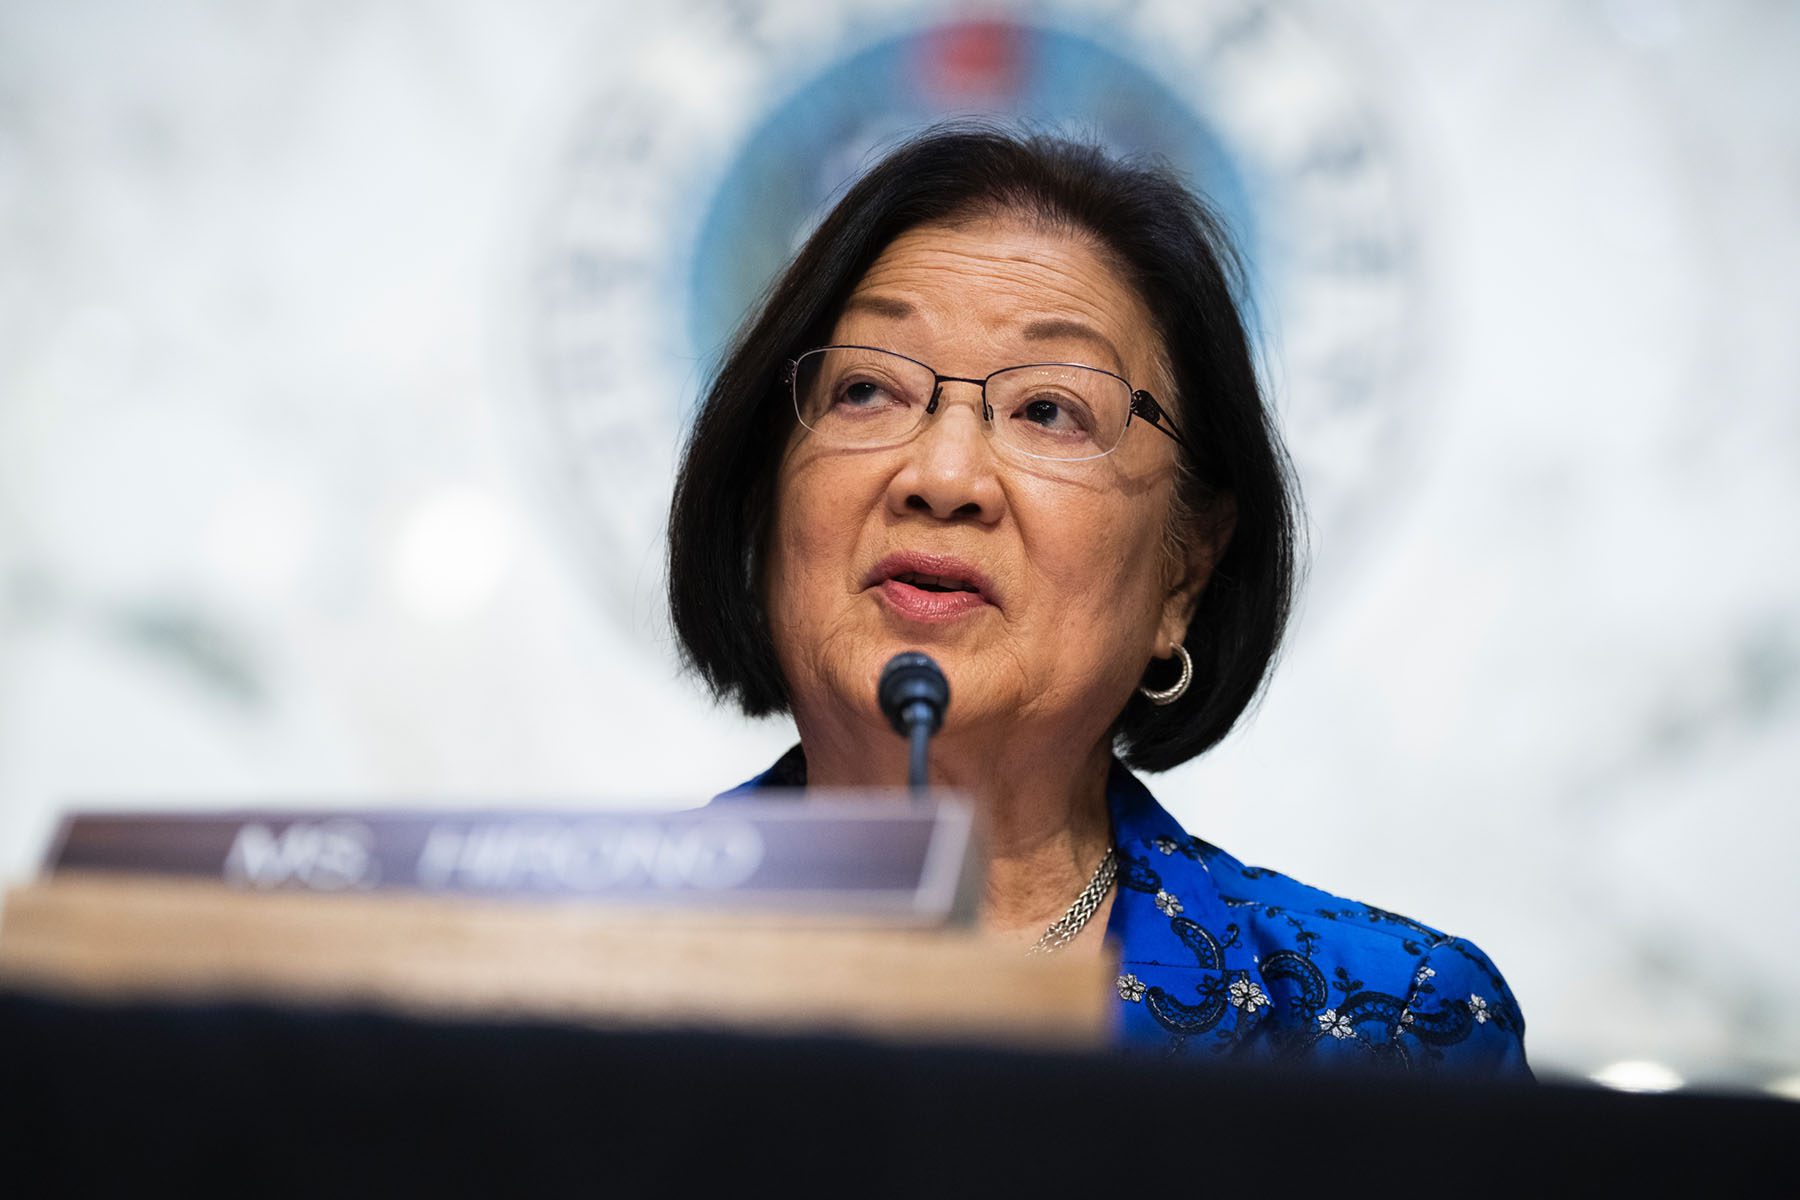 Sen. Mazie Hirono speaks into a microphone on Capitol Hill.